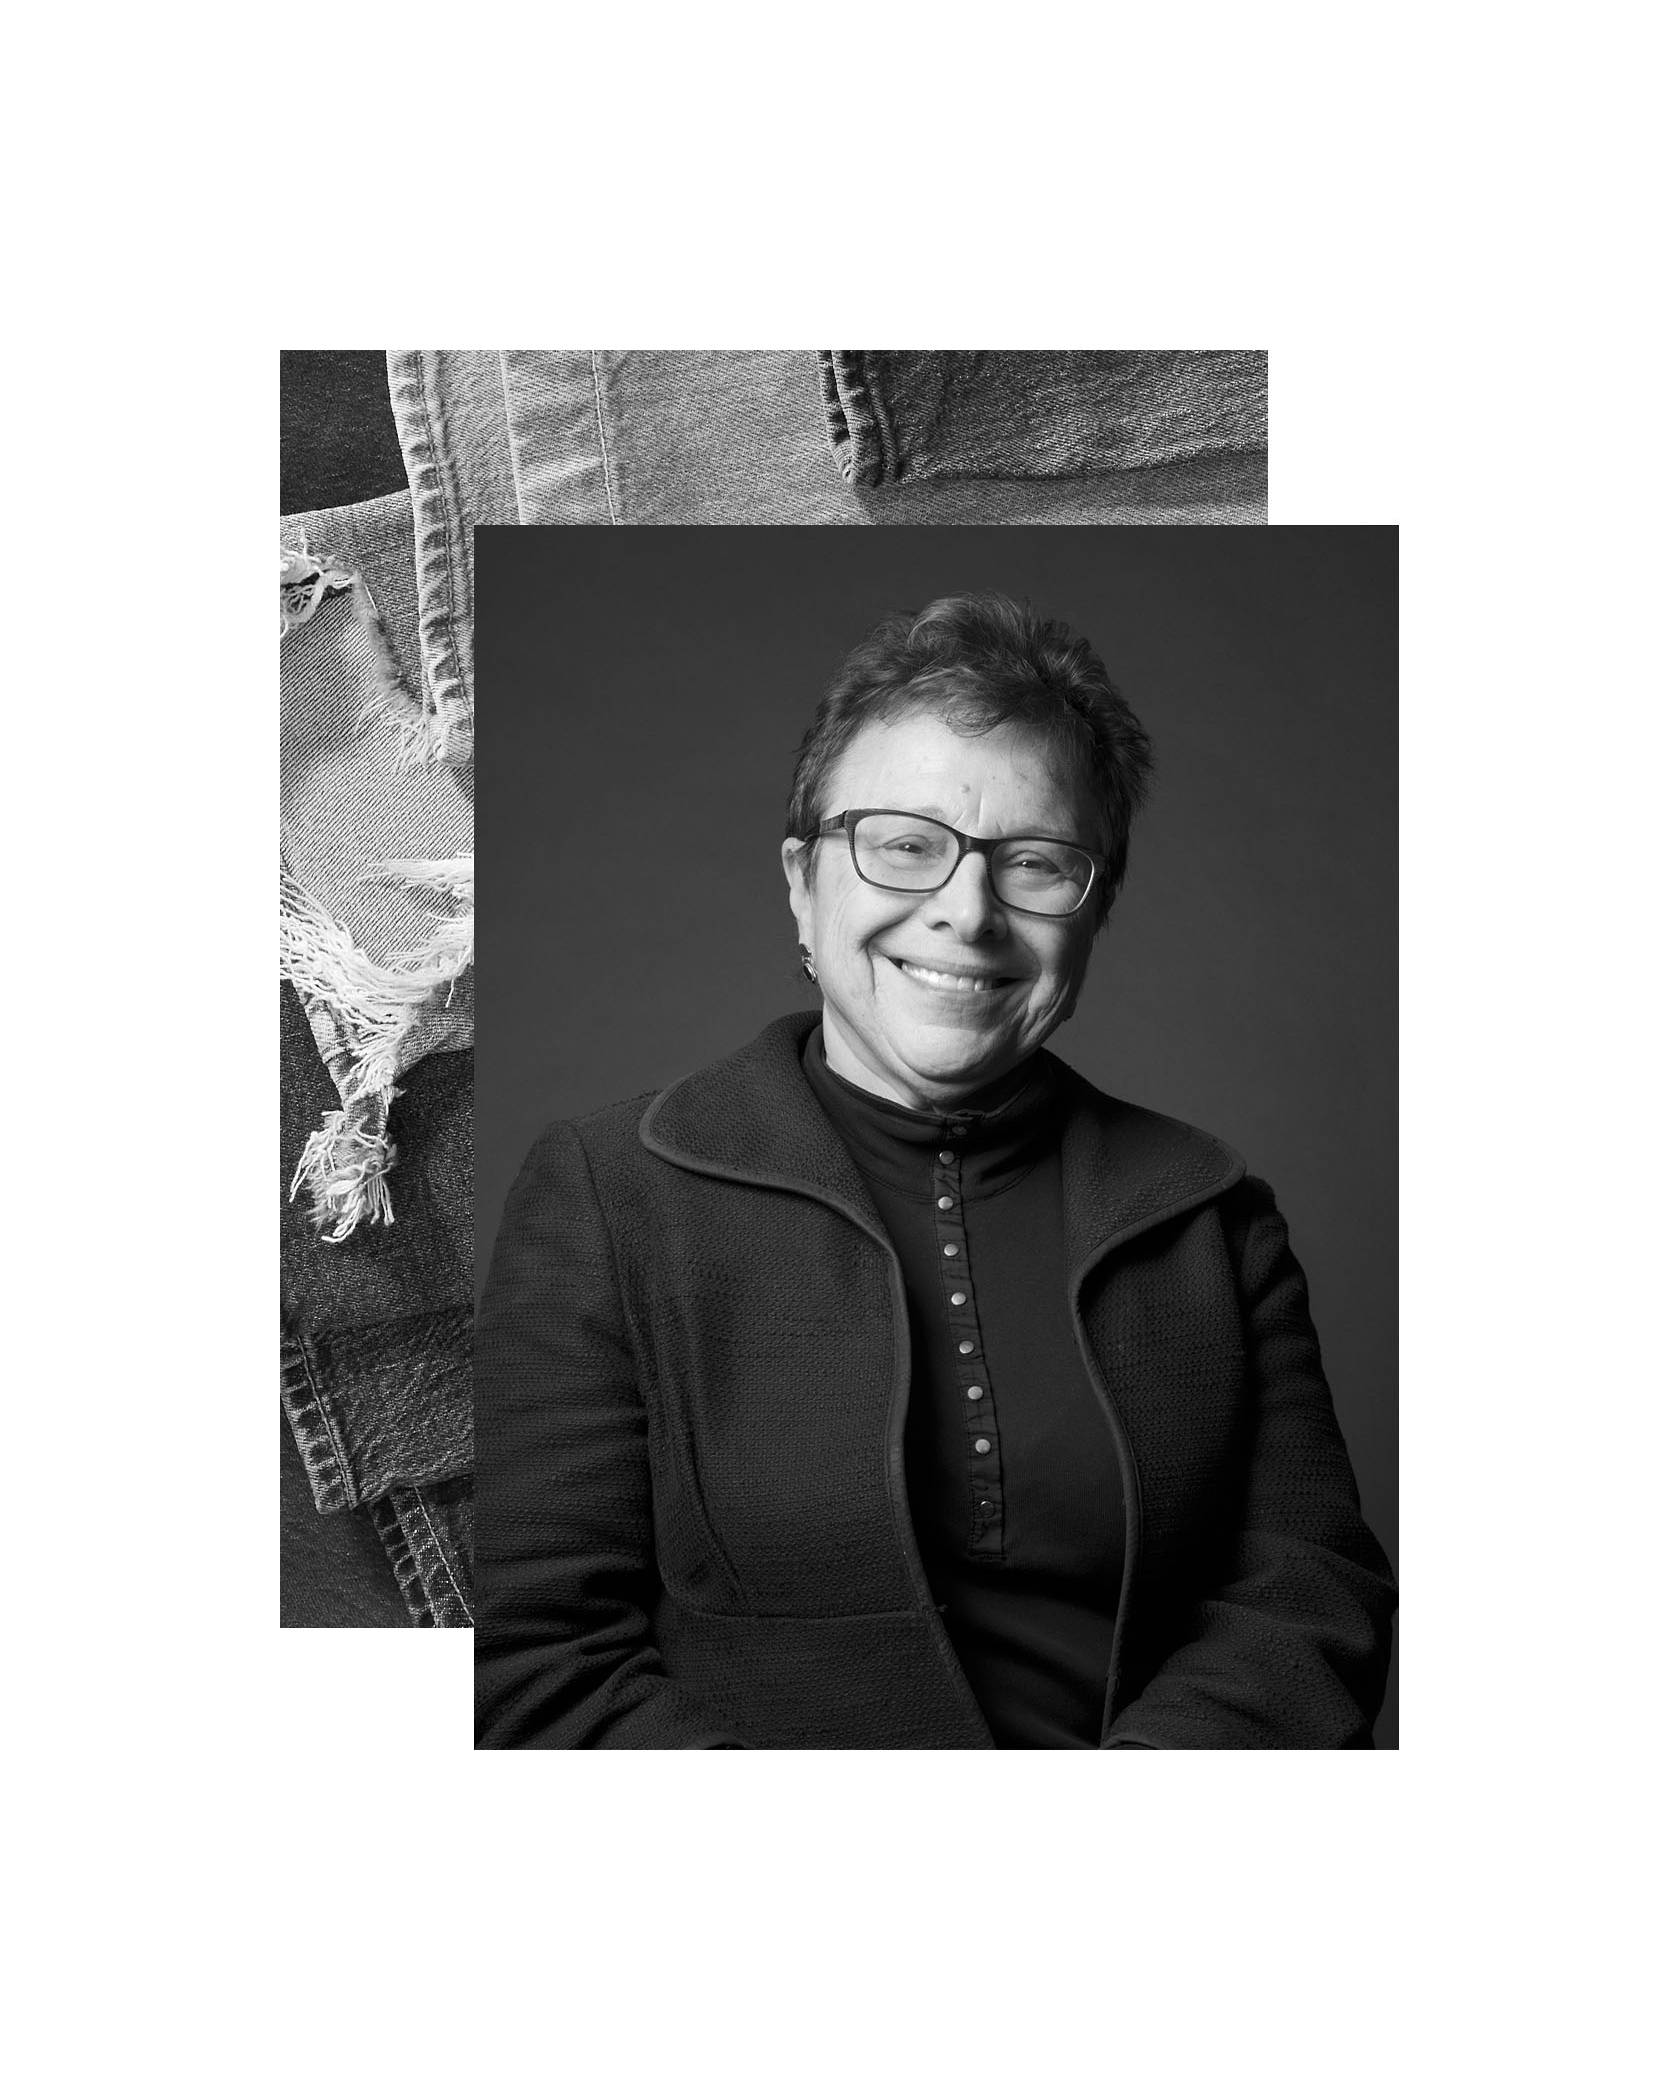 Black and white image of Patti Giggans, Peace Over Violence's executive Director layered on top of a black and white image of frayed denim jeans.